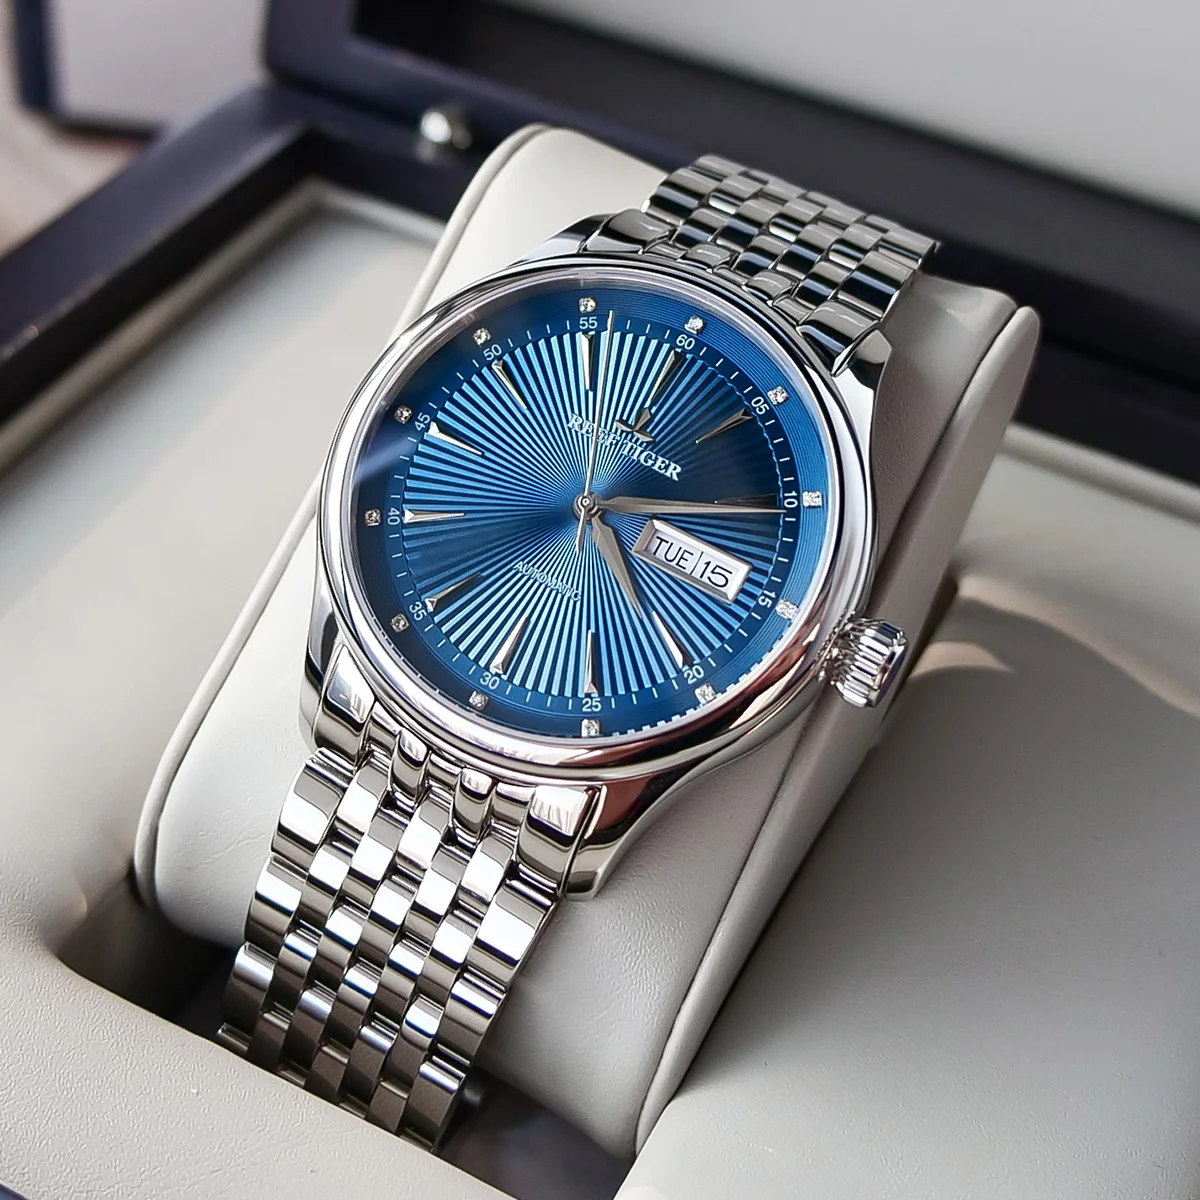 US $174.20 2021 Reef TigerRT Luxury Dress Watch For Men Stainless Steel Bracelet Blue Dial Automatic Wrist Watches RGA8232